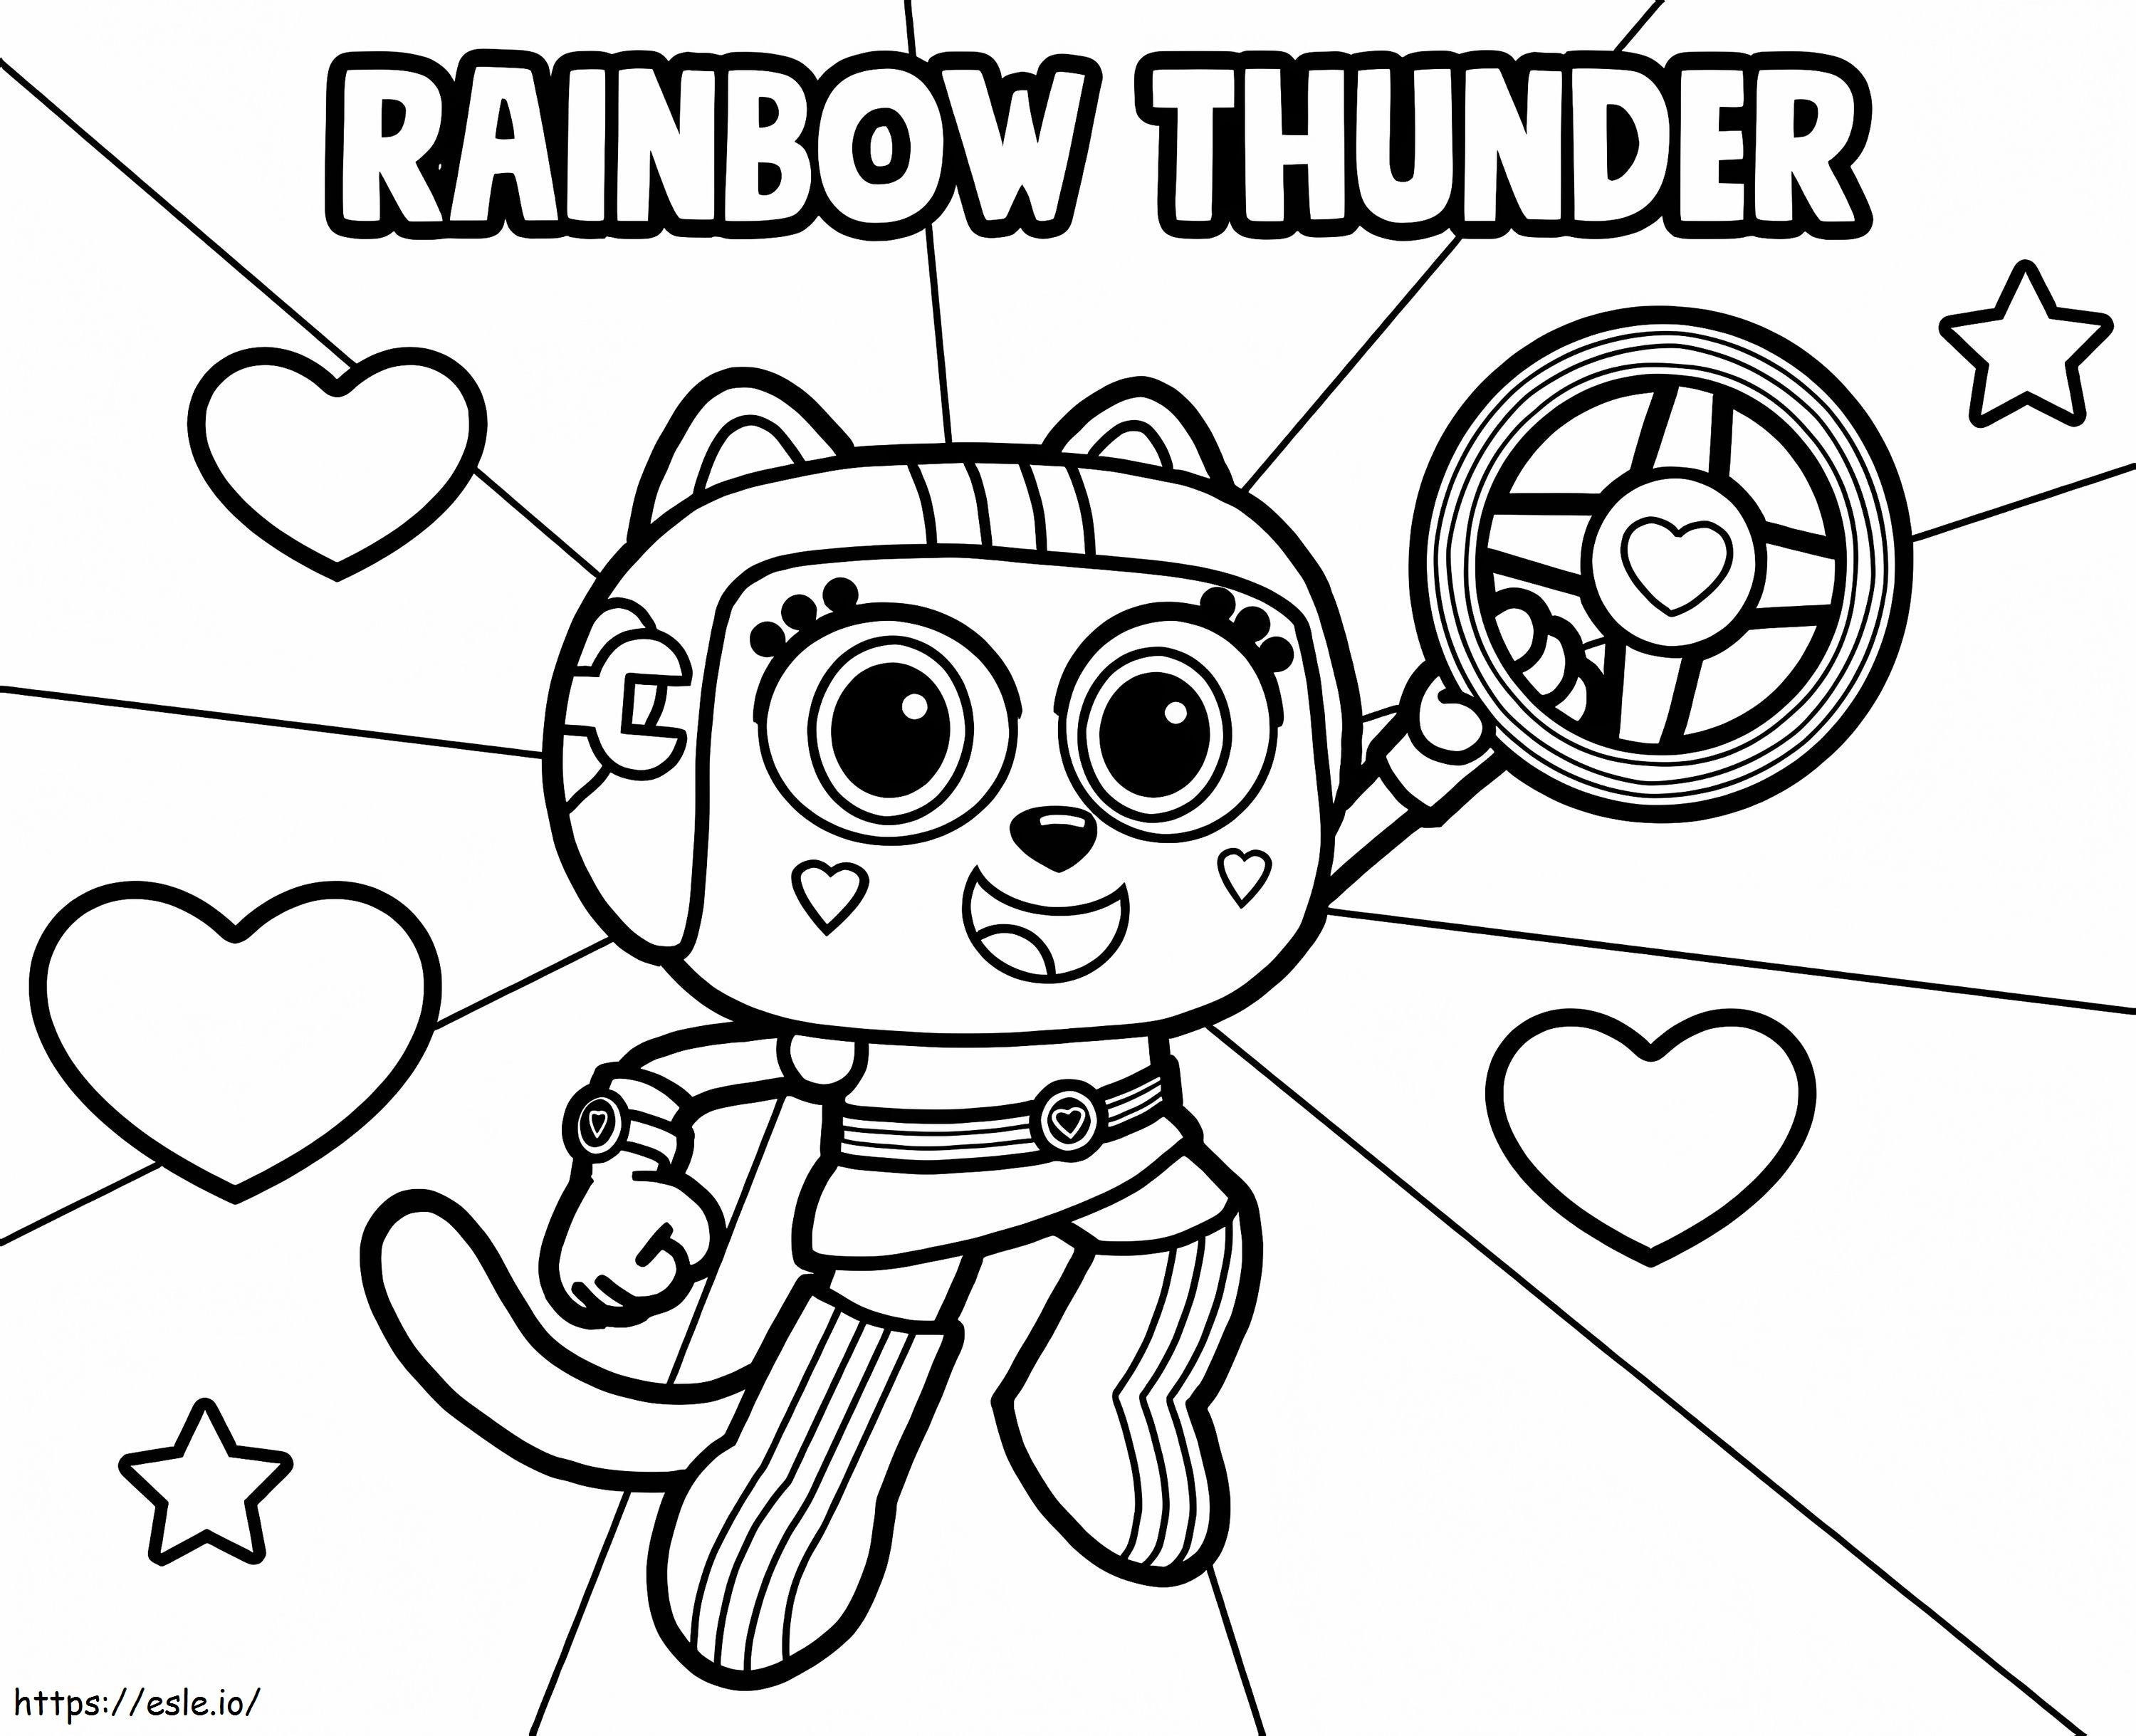 Rainbow Thunder From Chico Bon Bon coloring page